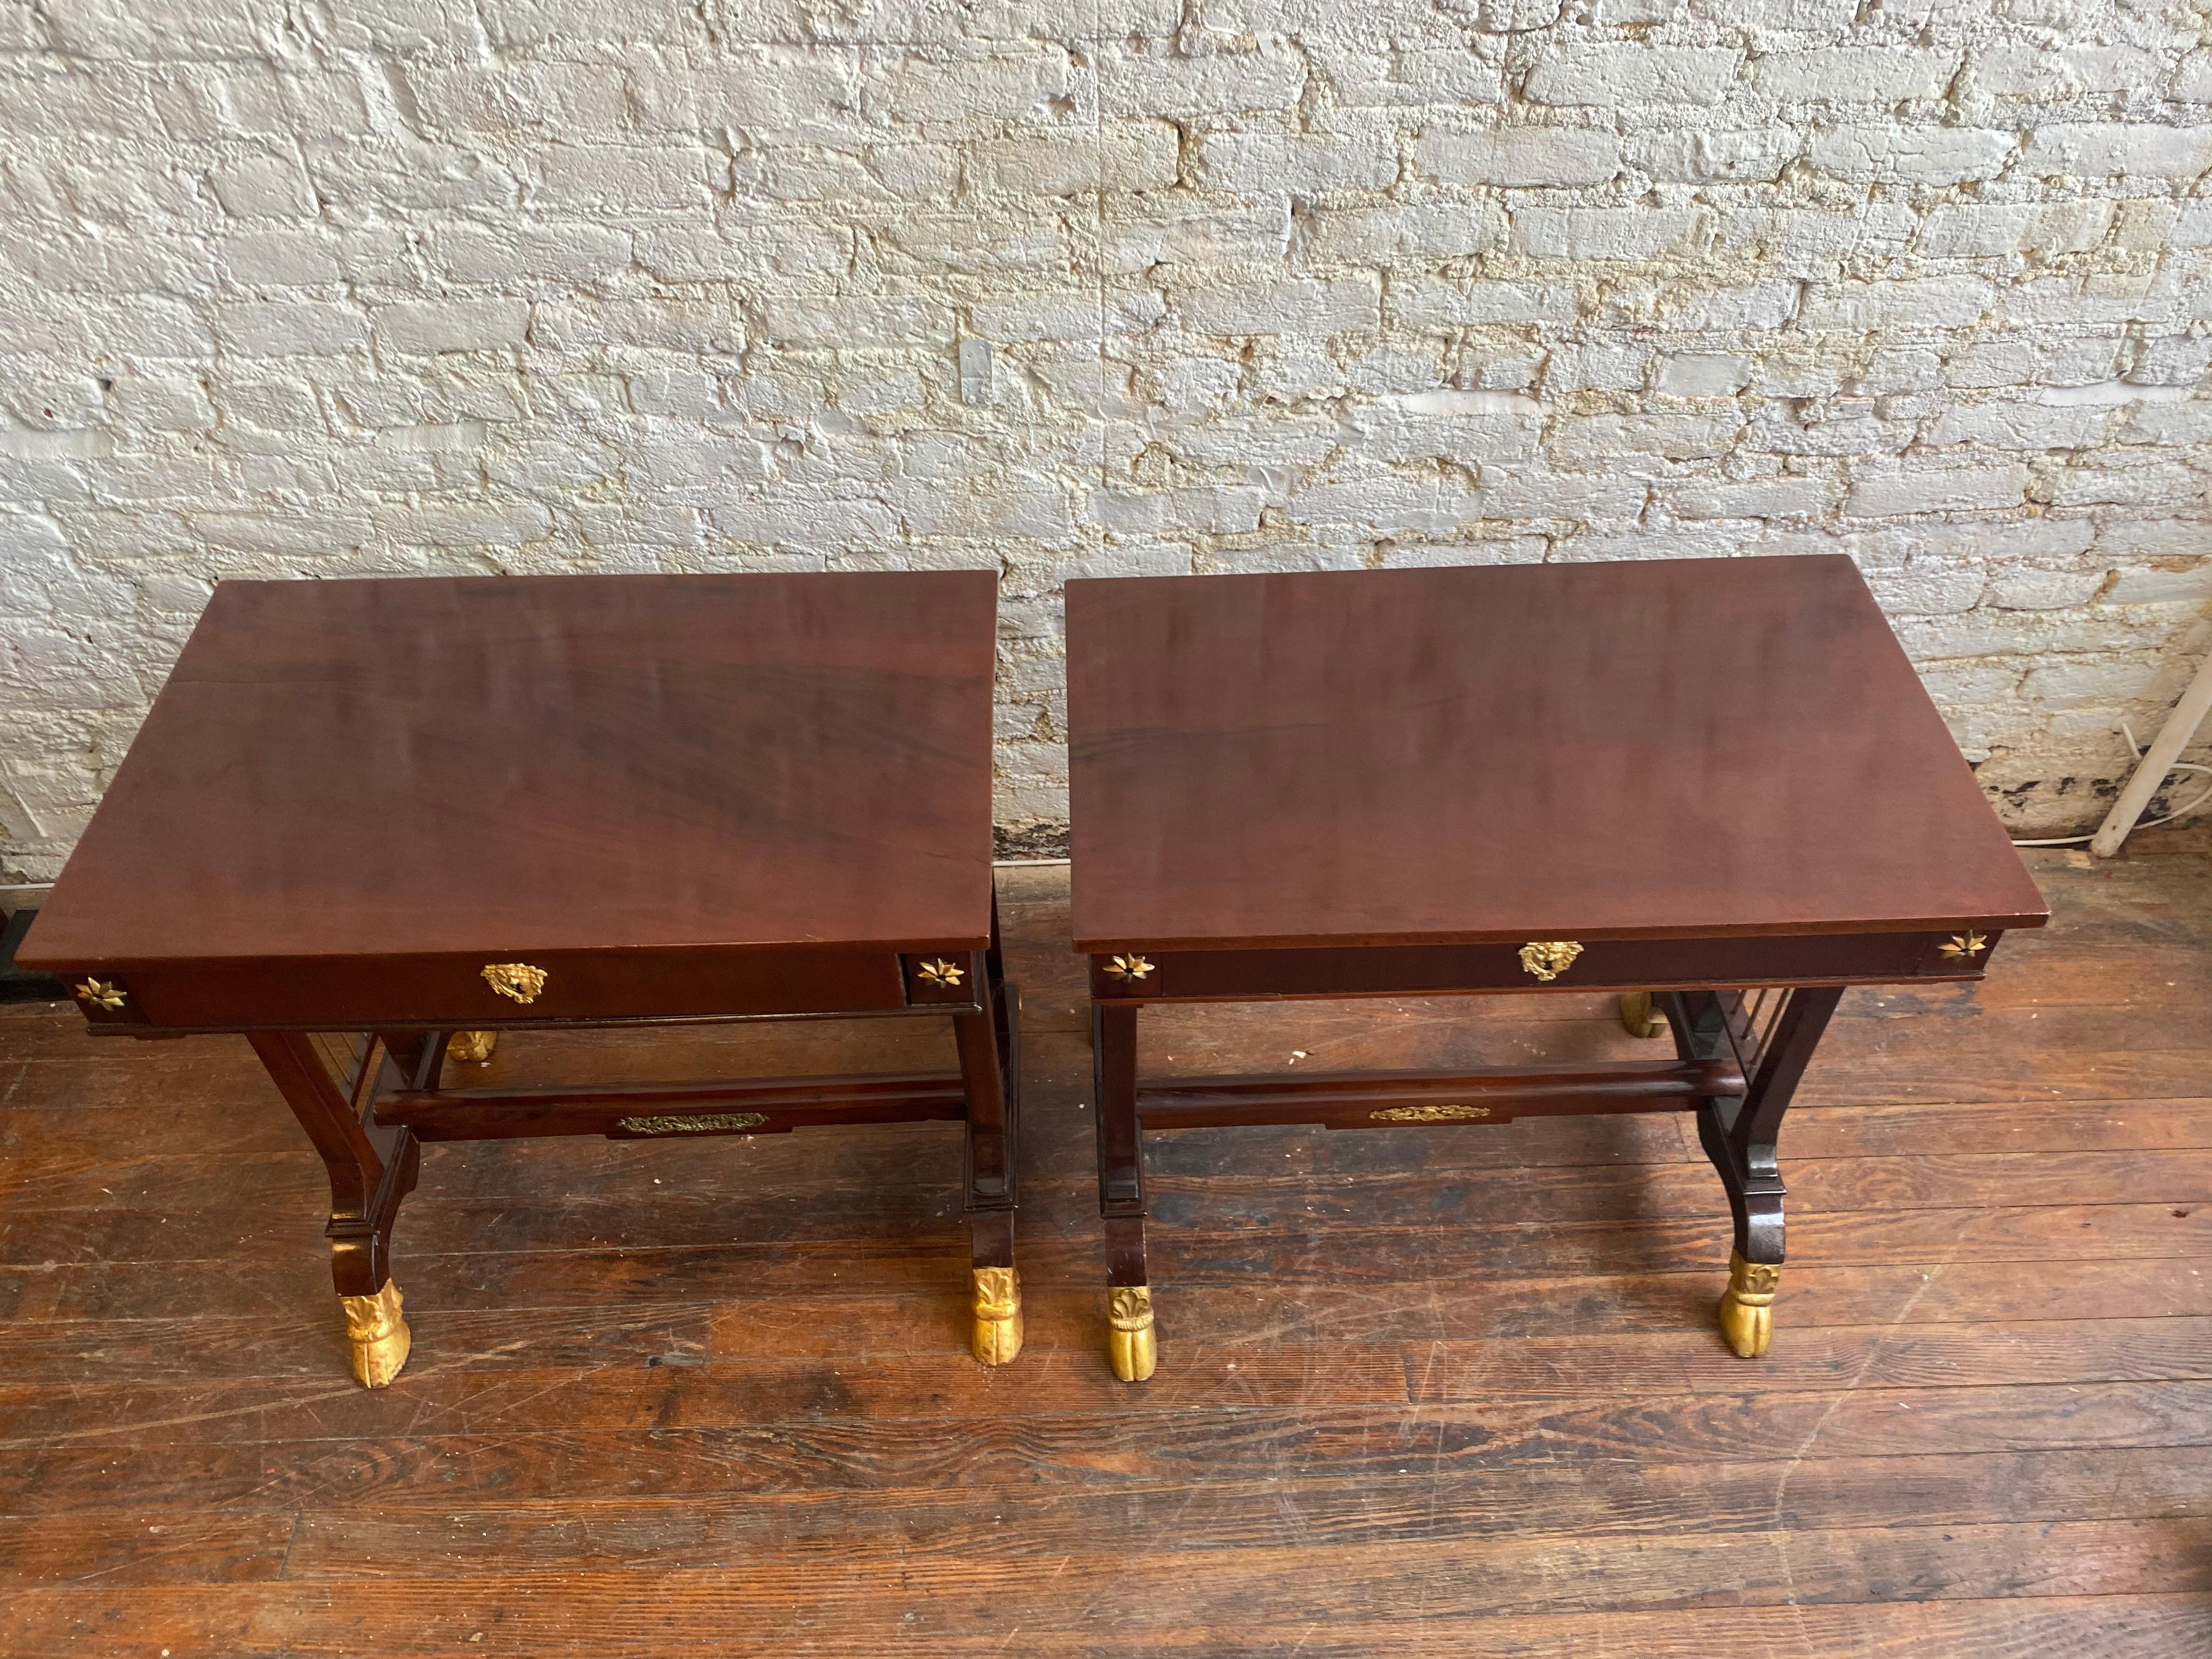 Pair of 19th century northern European neoclassical mahogany side tables with hoof feet. Possibly Russian. Parcel gilt on feet and bronze mounts.